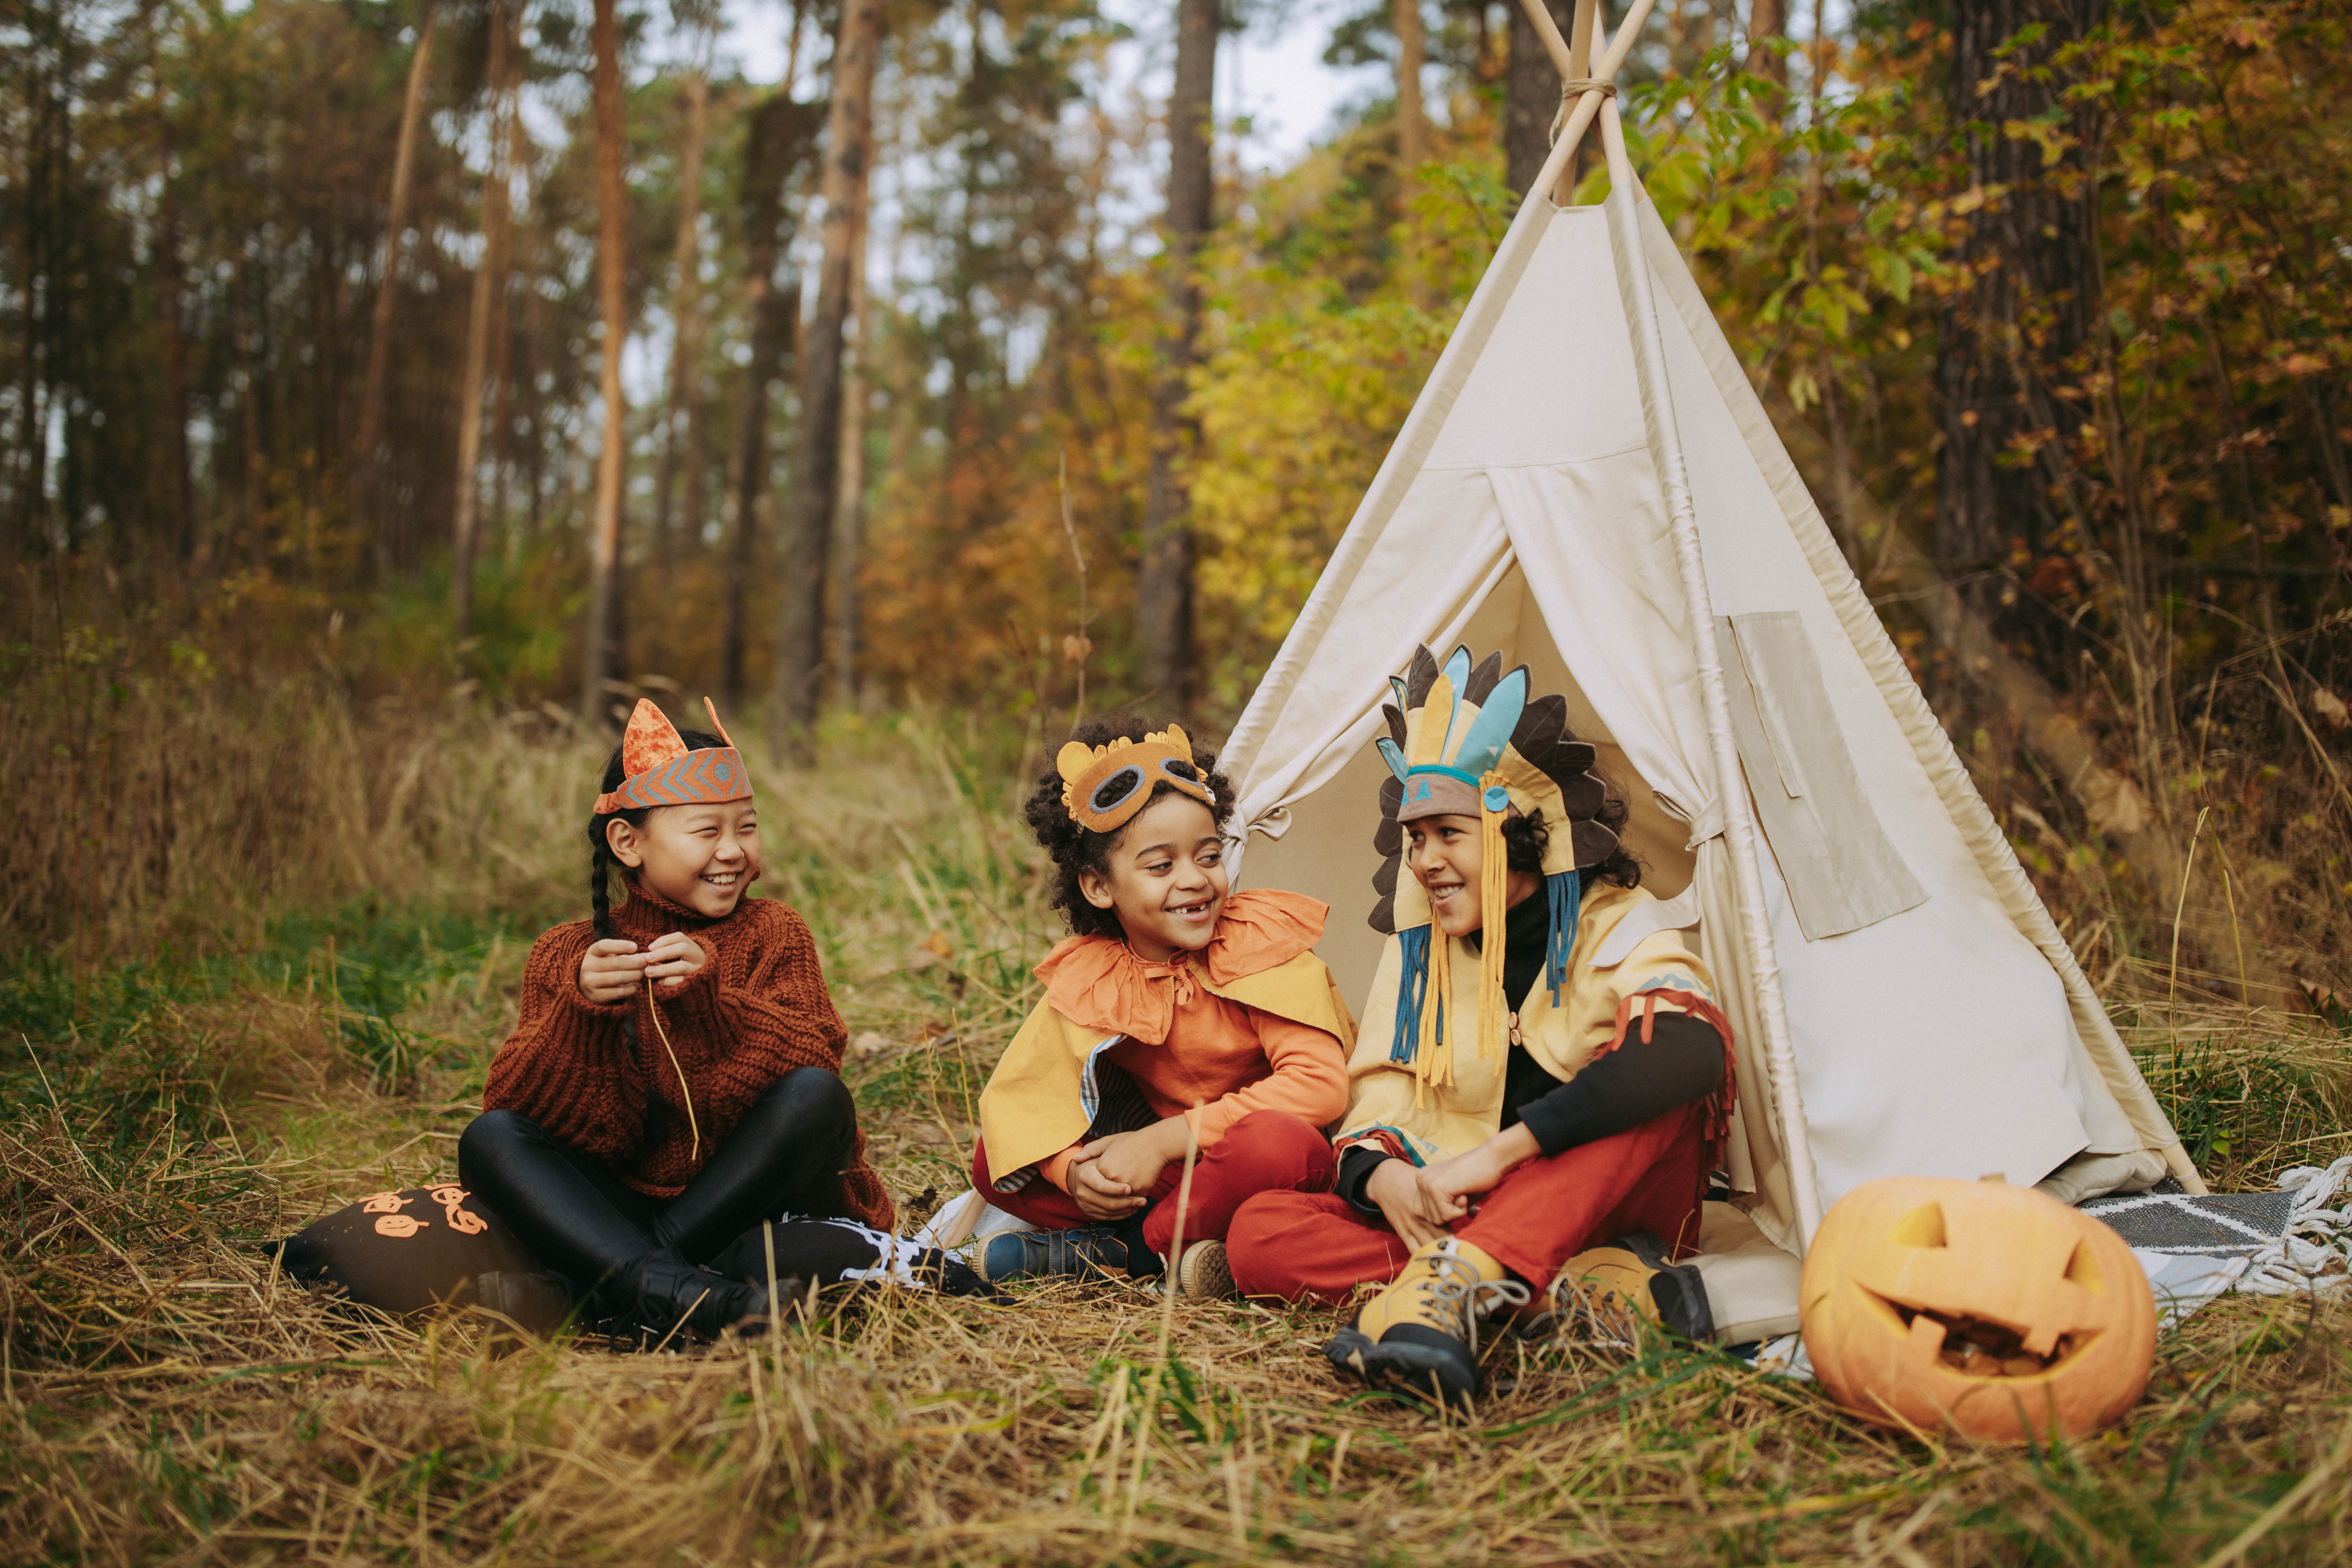 Halloween fun without the fright - Featured Image